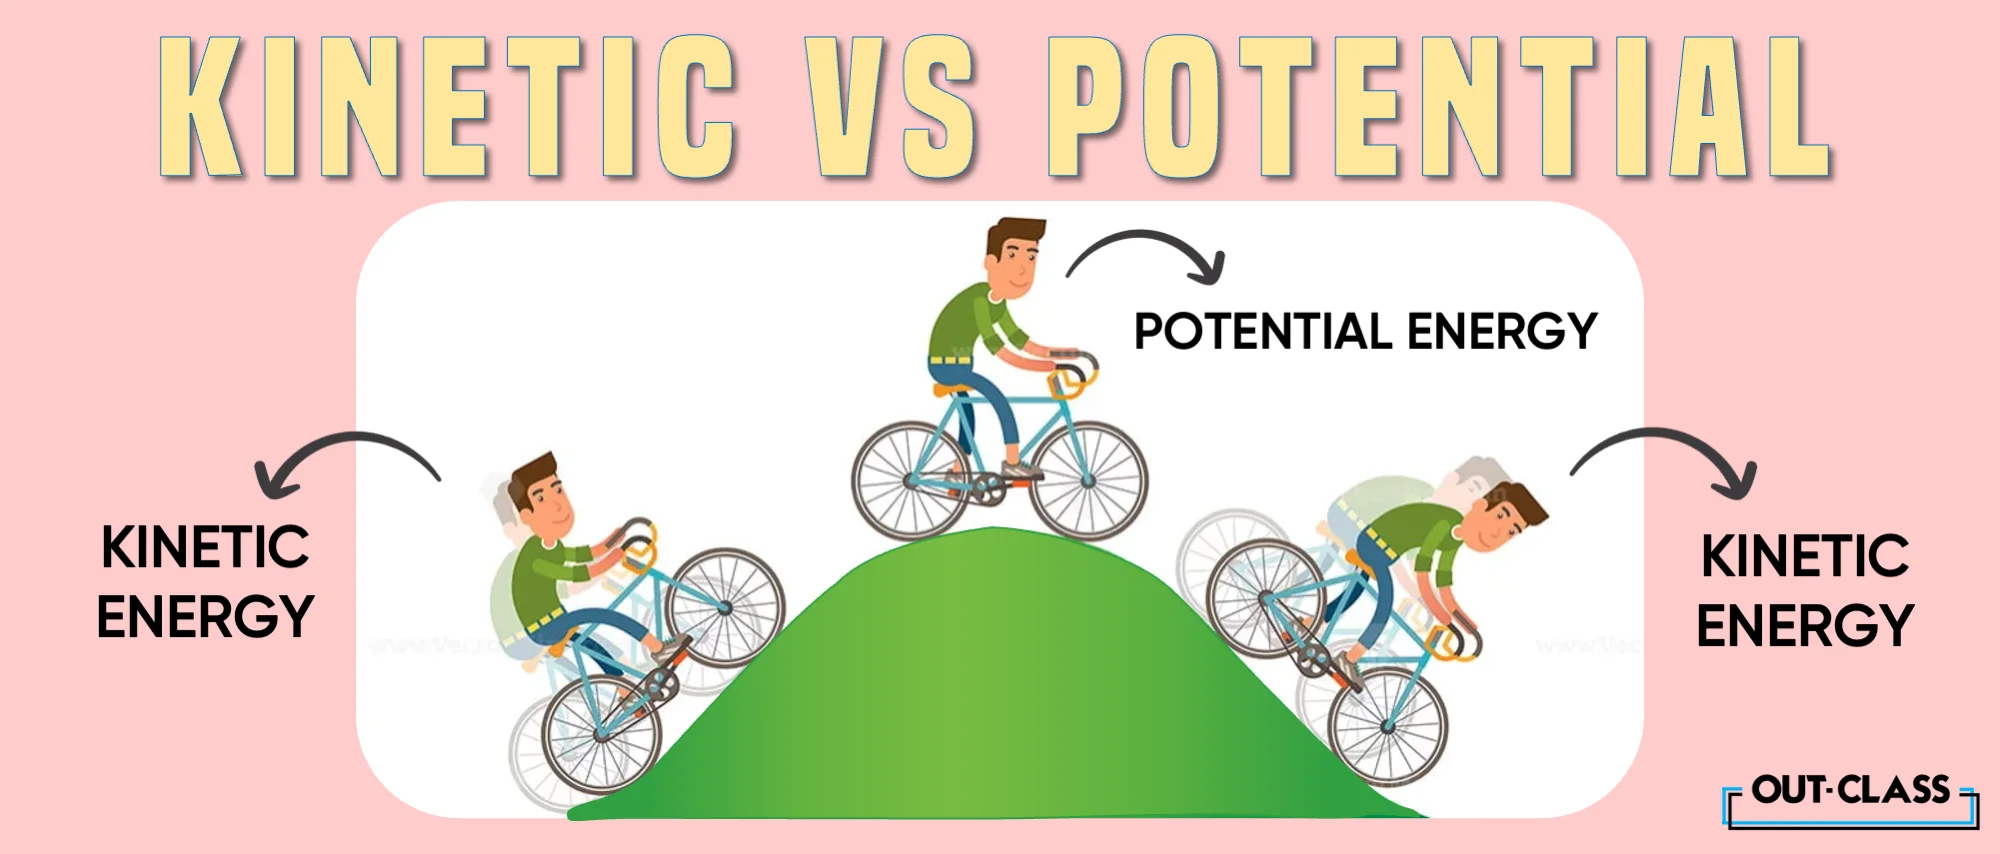 It shows the difference between potential and kinetic energy and relationship between potential and kinetic energy. It also includes examples of potential and kinetic energy.